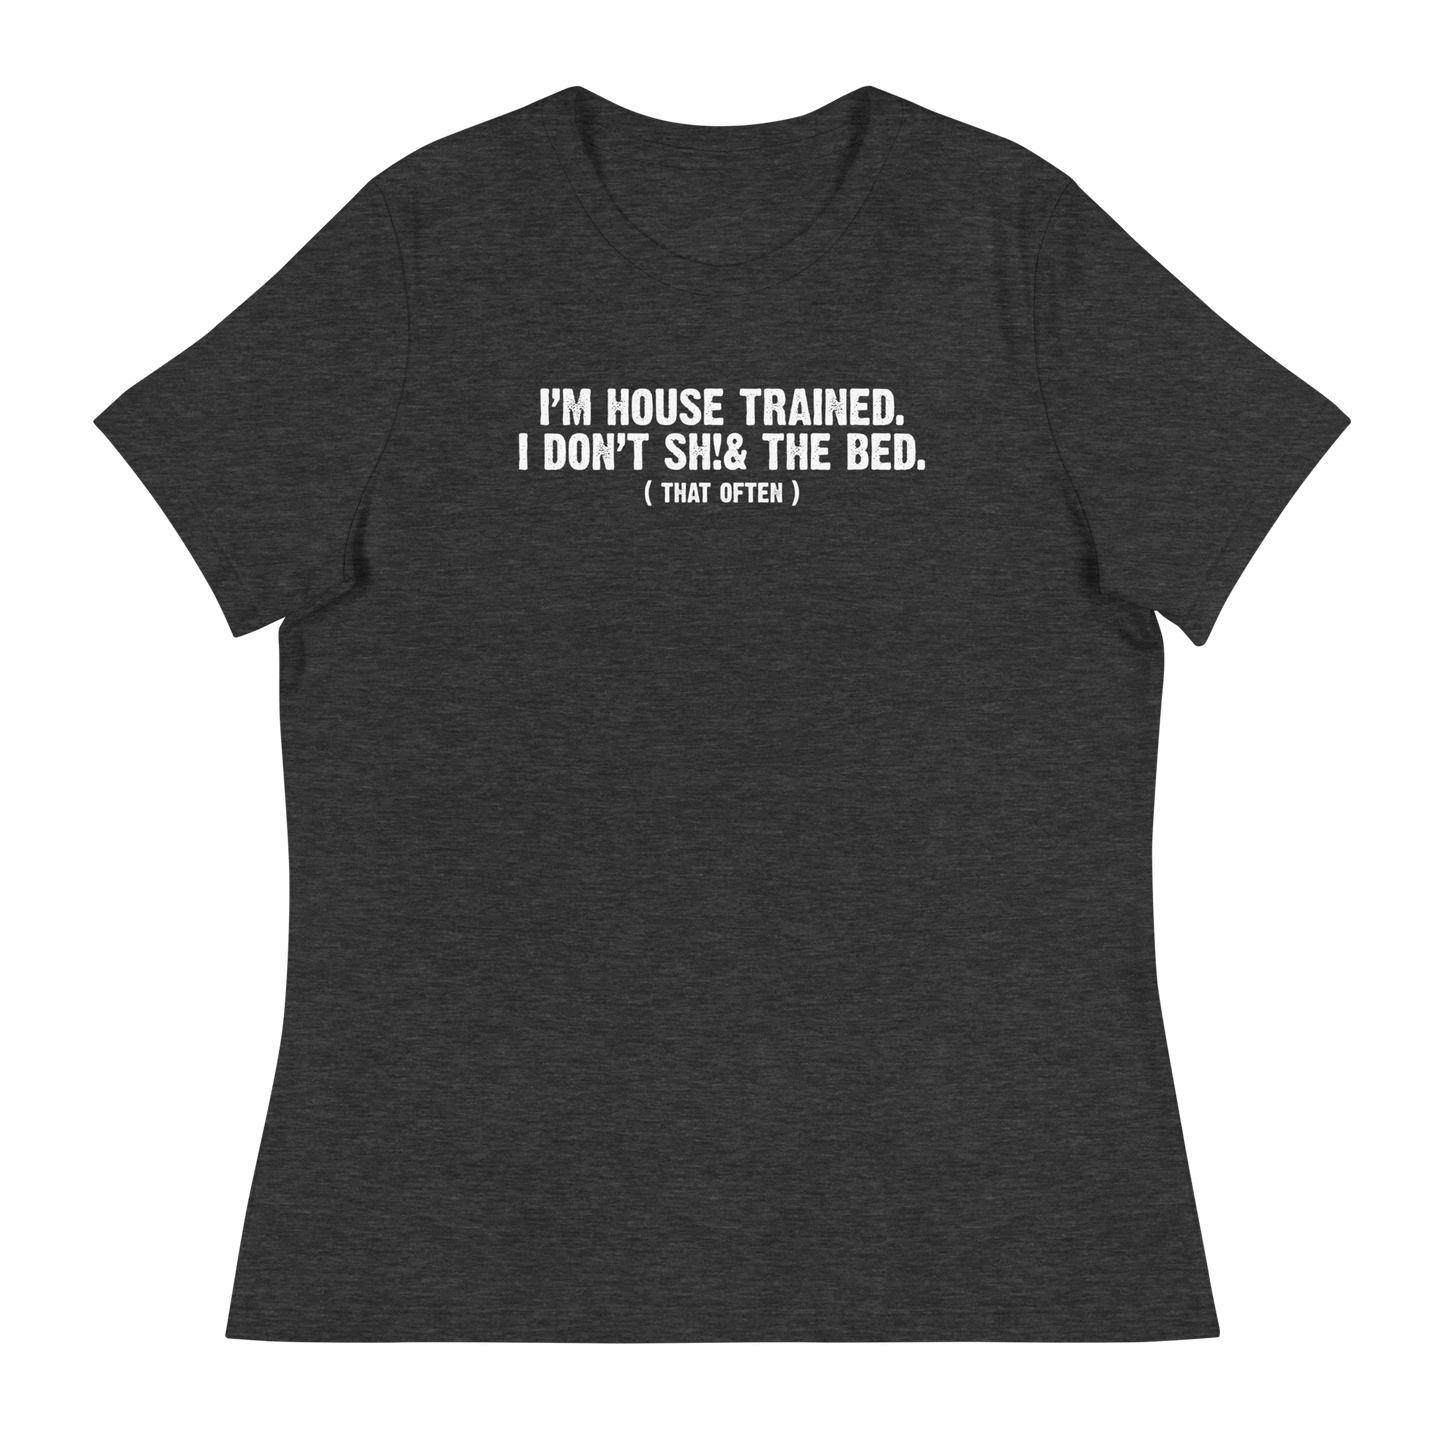 Women's - I'm House Trained. I Don't Sh!& the bed. ( that often ) - Funny T-Shirt